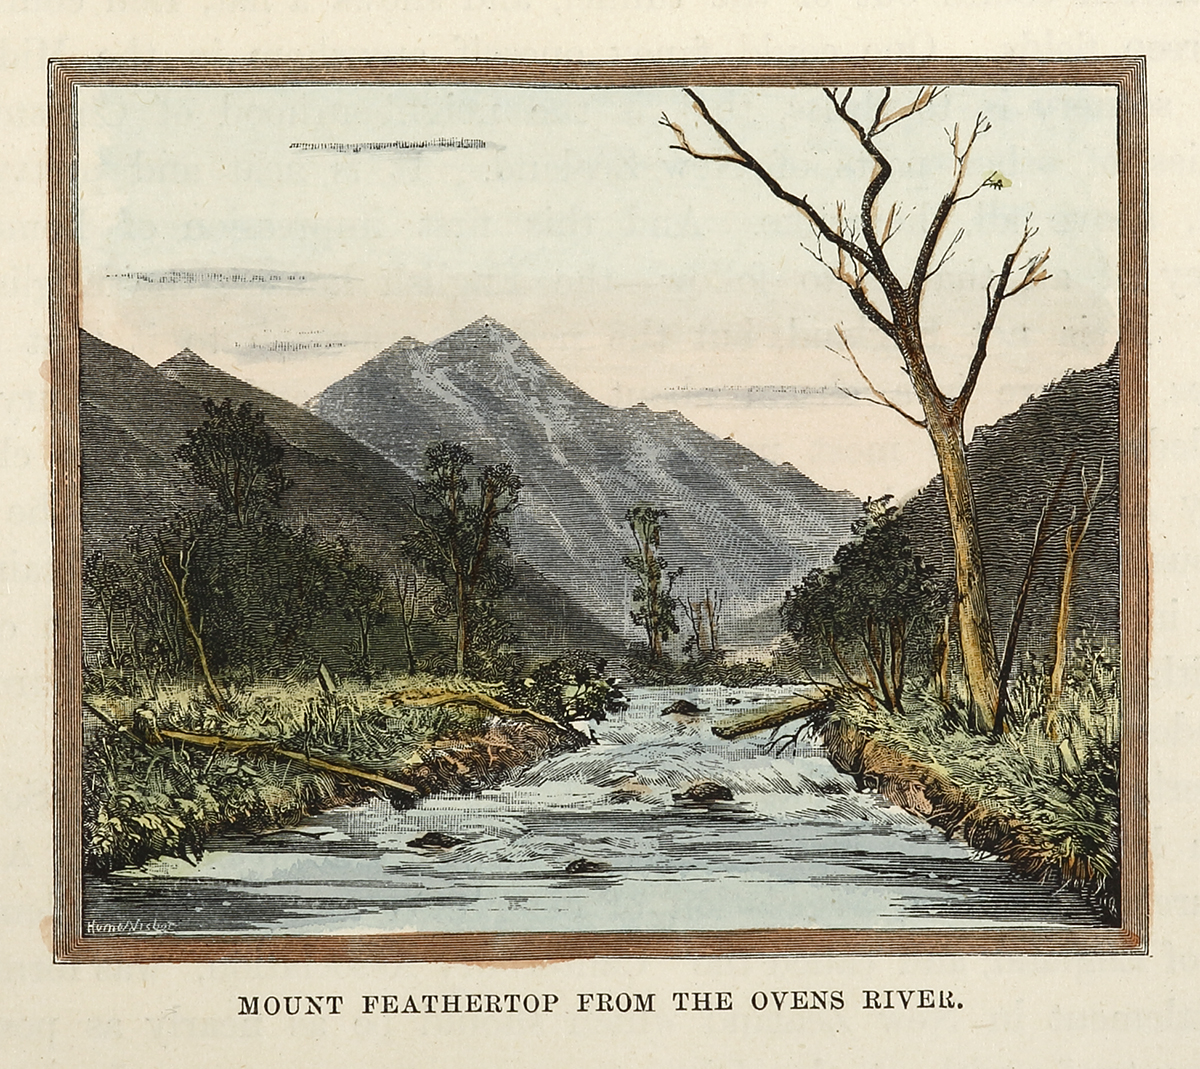 Mount Feathertop from the Ovens River. - Antique Print from 1887